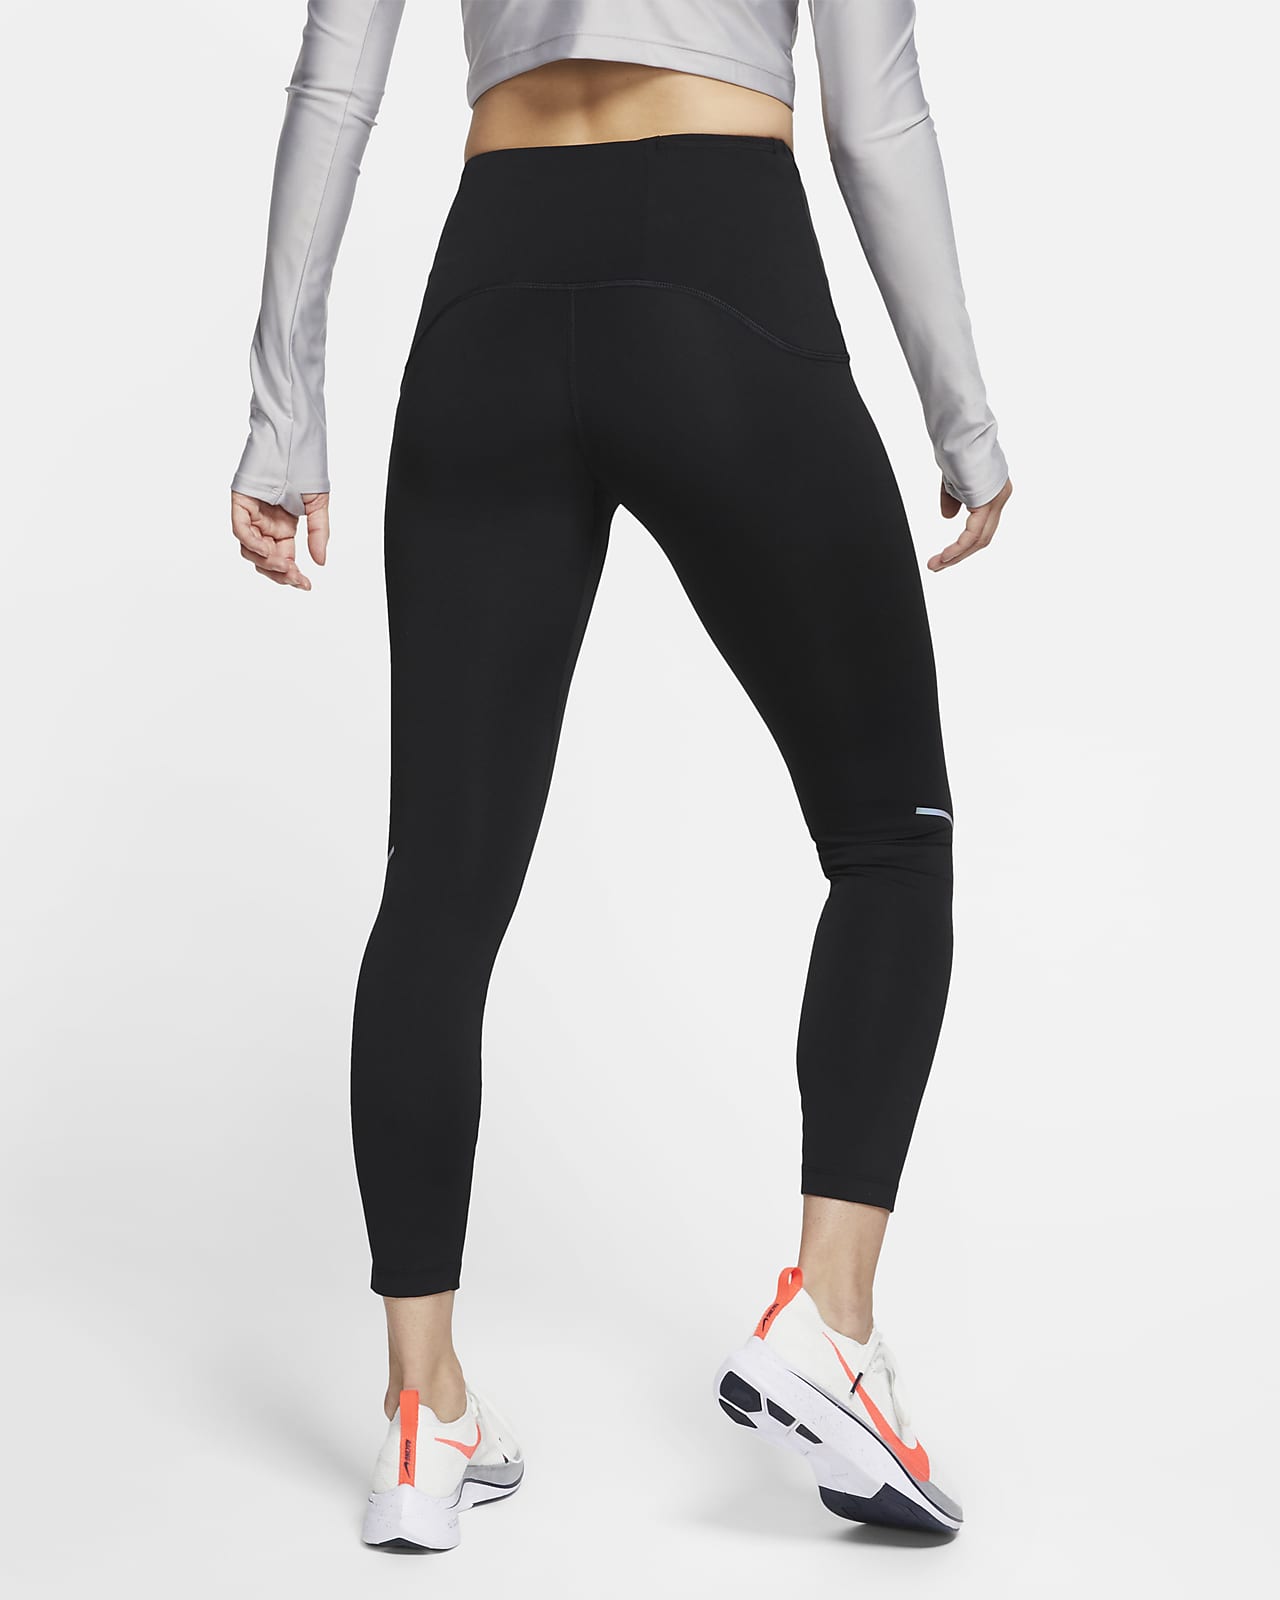 the nike speed tight fit